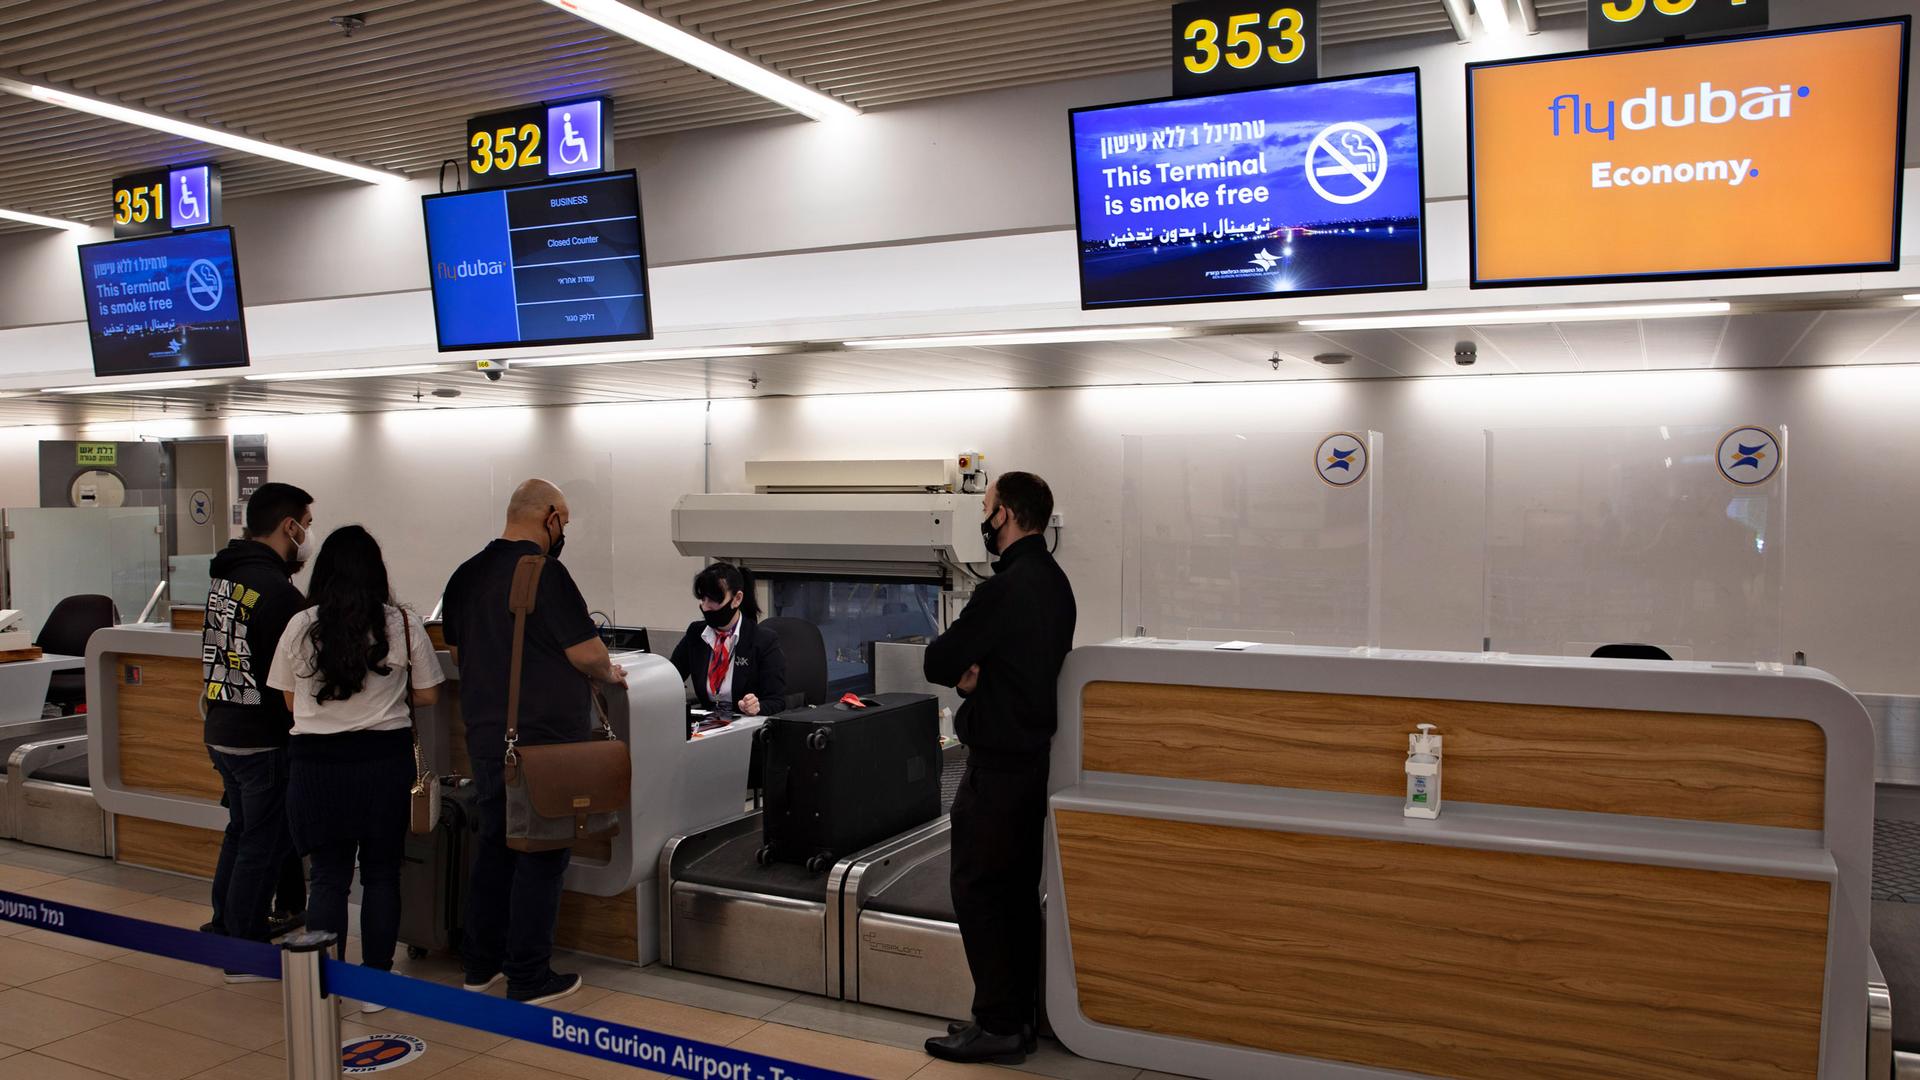 A group of three people are shown from behind standing at a ticketing agent desk at Ben Gurion airport.